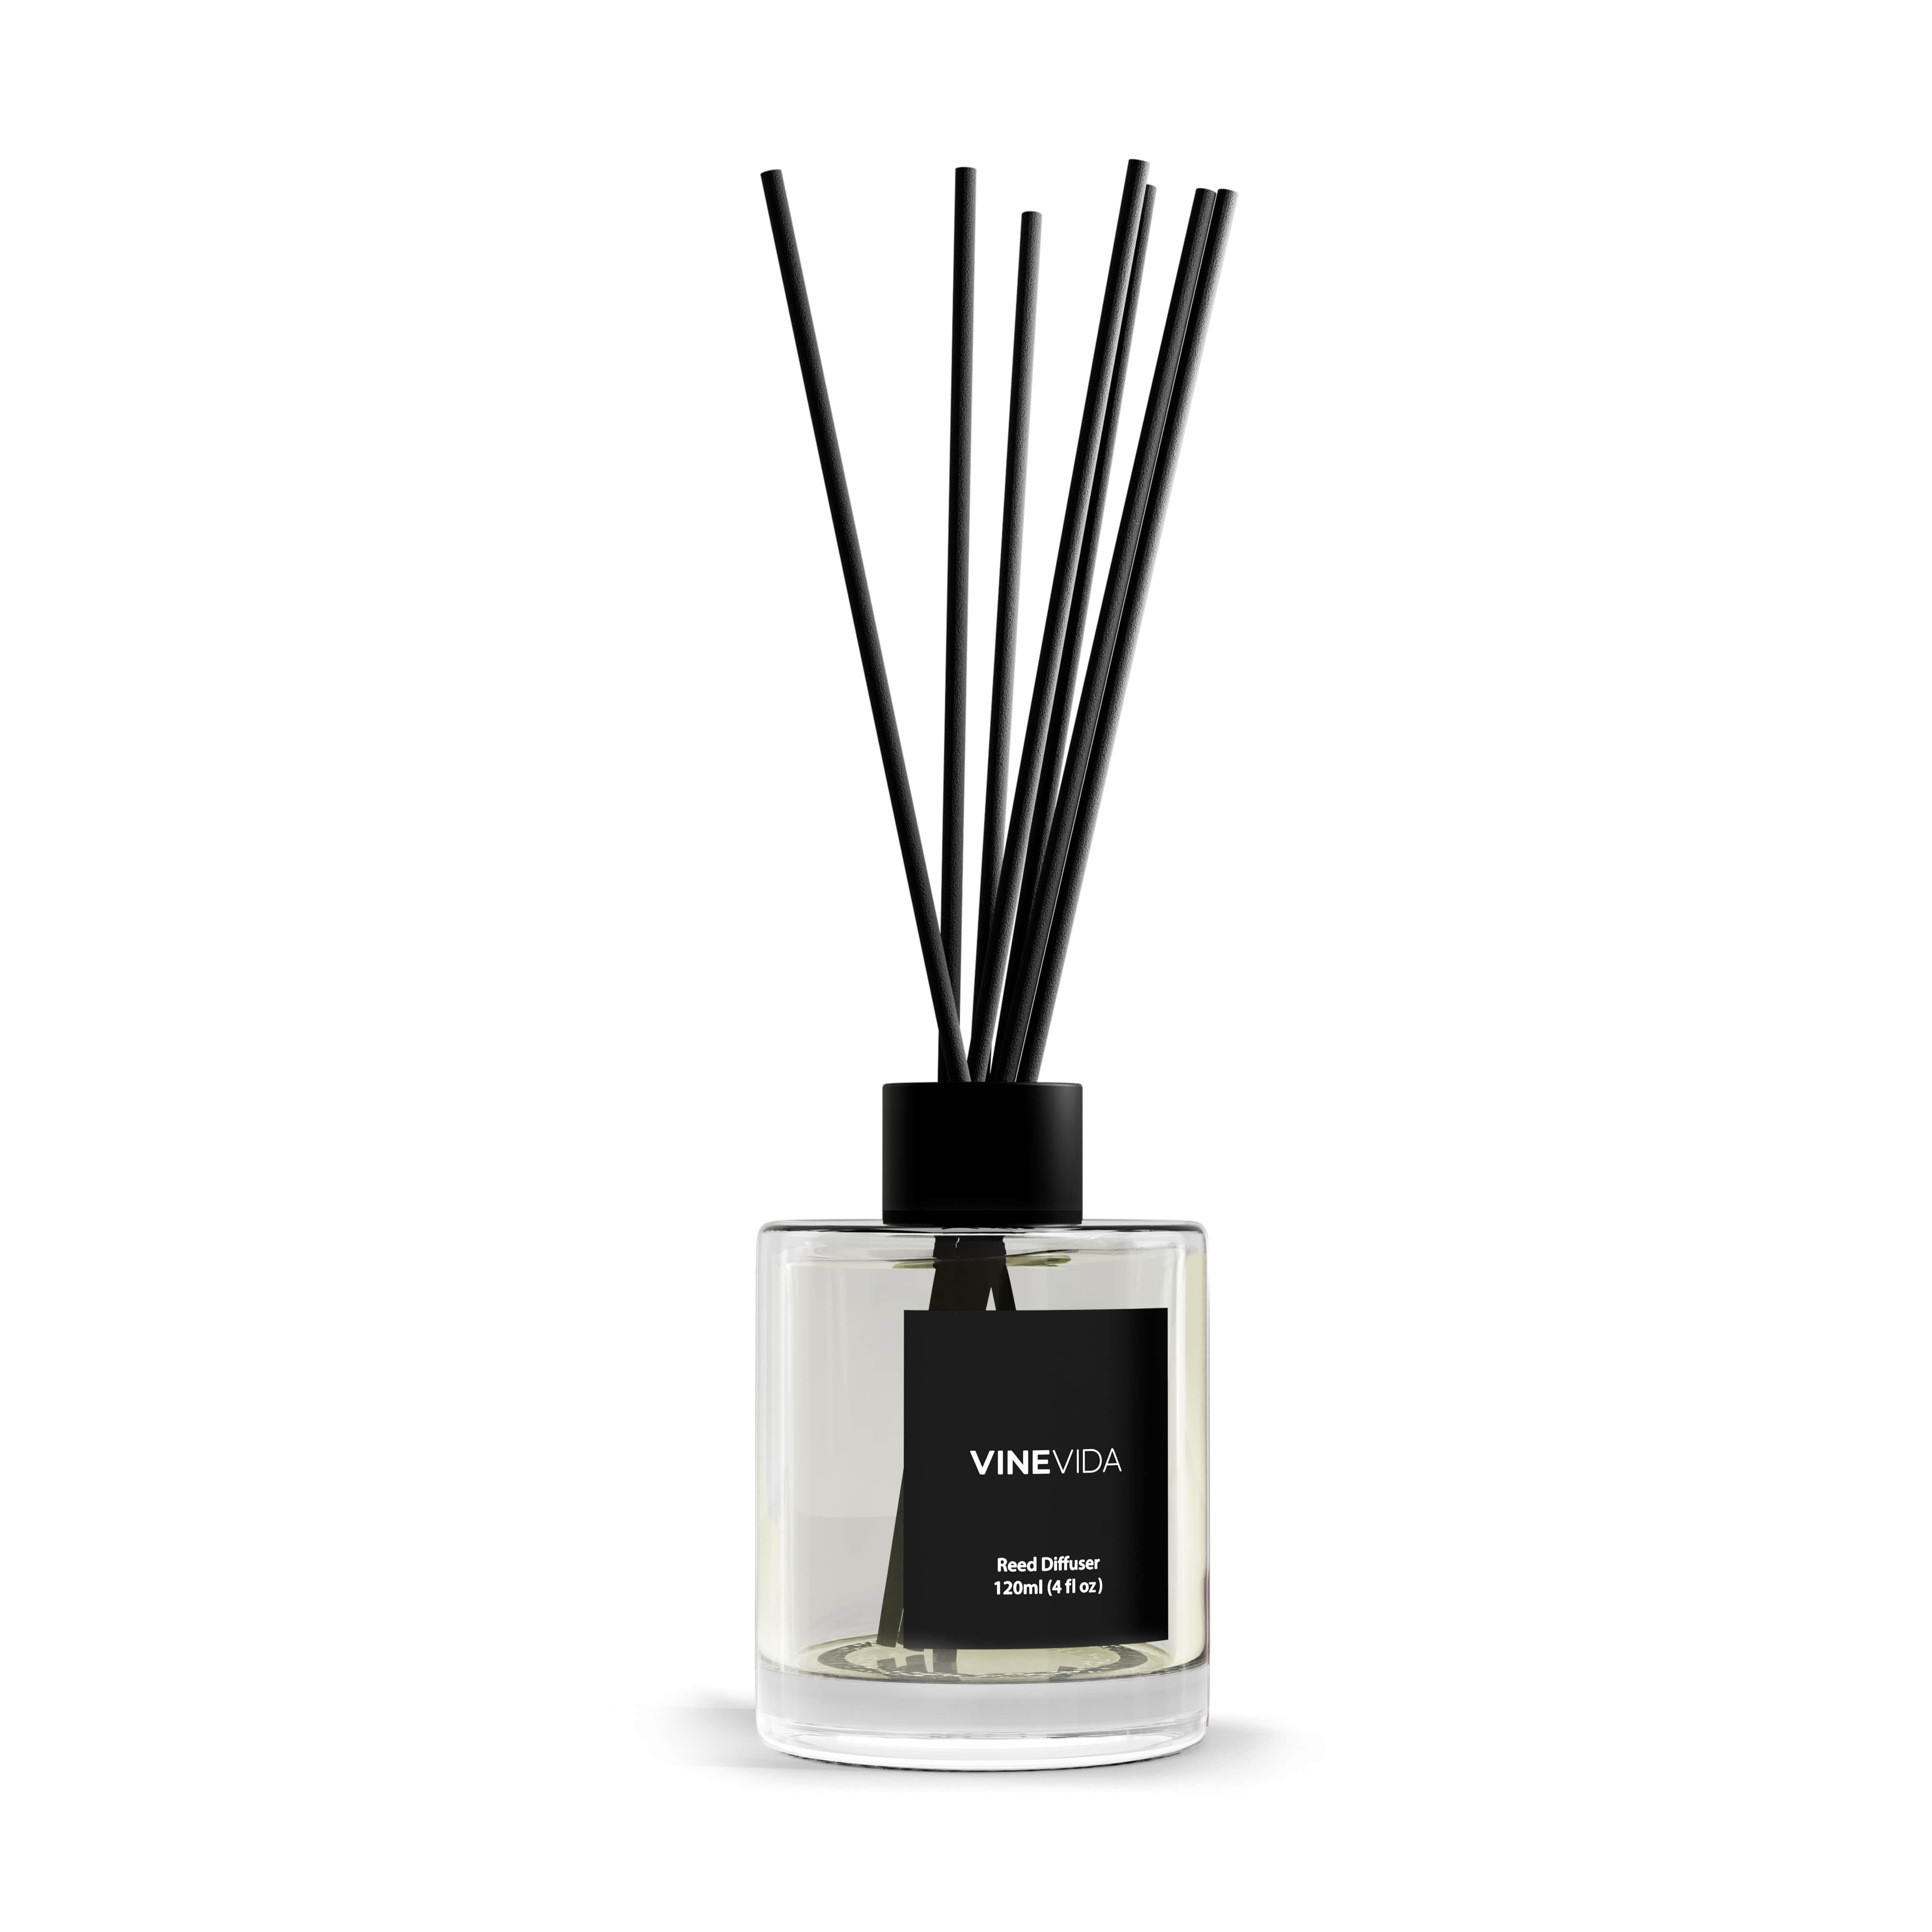 NO. 1303 Reed Diffuser - Inspired by: Santal 26 by Le Labo